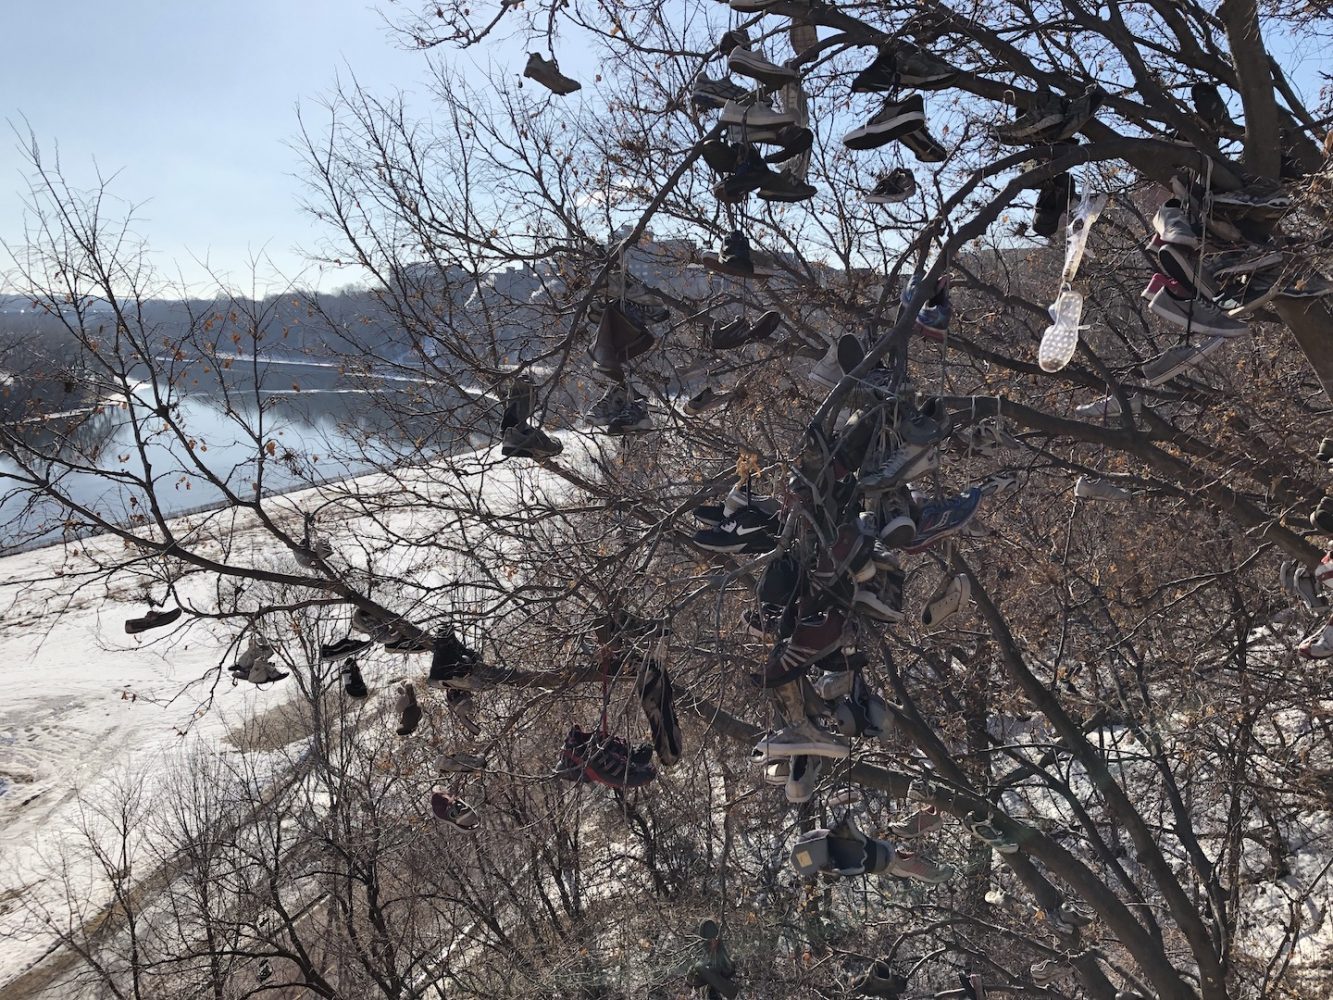 Dozens of shoes hang from branches with the Mississippi River in the background.